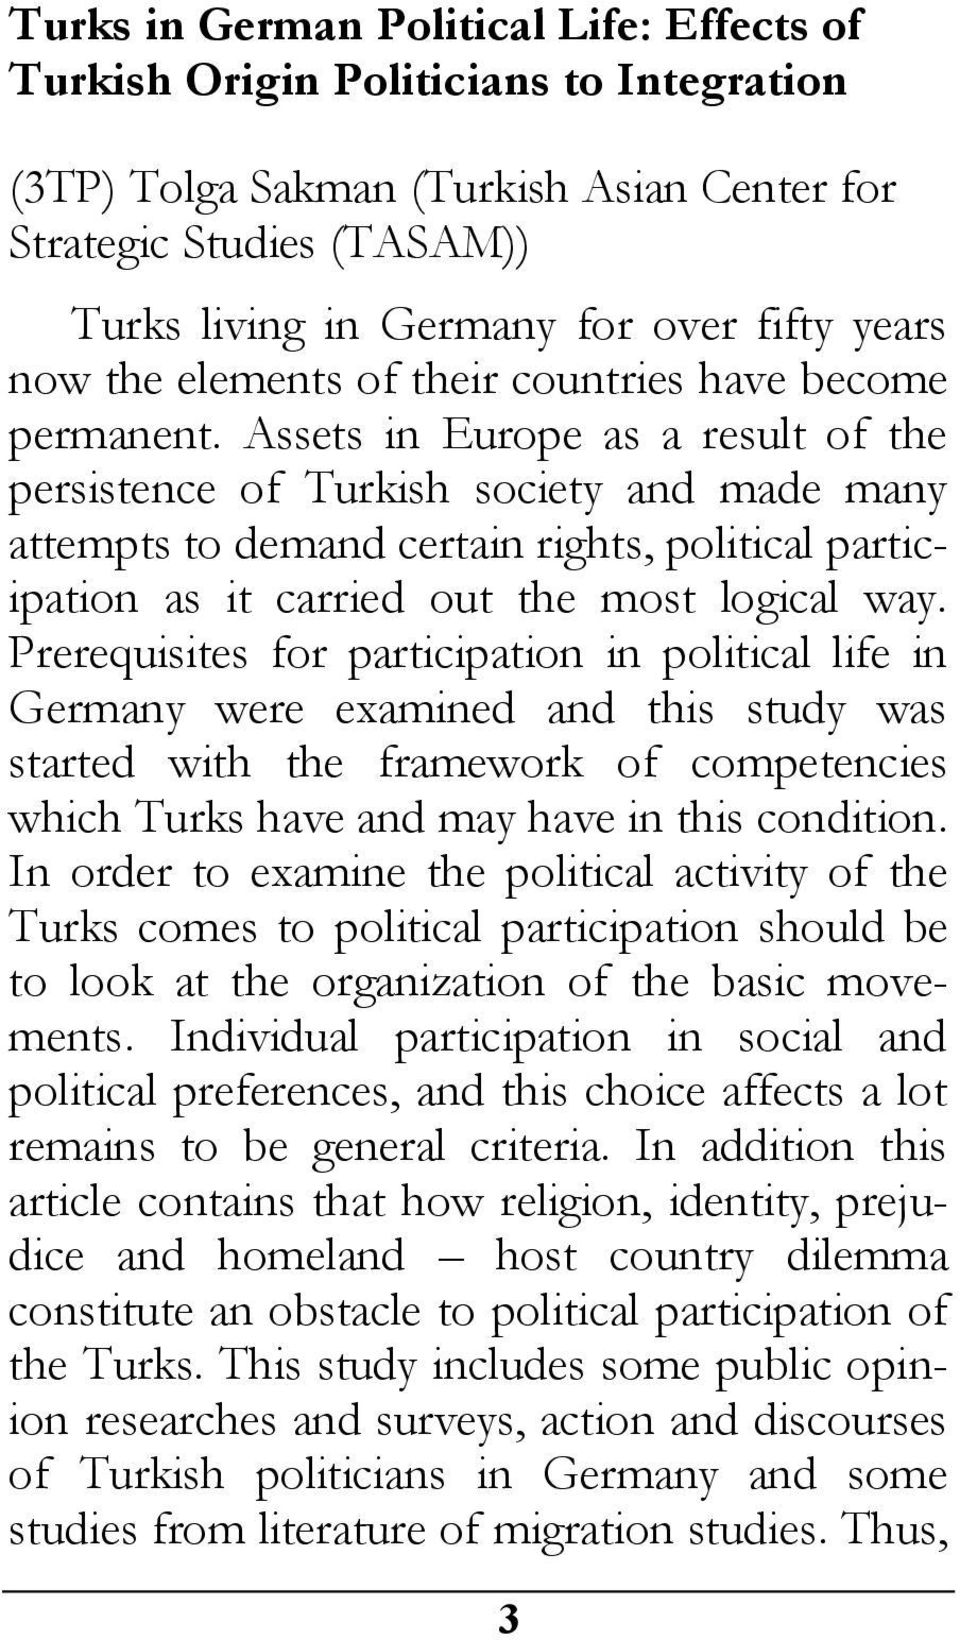 Assets in Europe as a result of the persistence of Turkish society and made many attempts to demand certain rights, political participation as it carried out the most logical way.